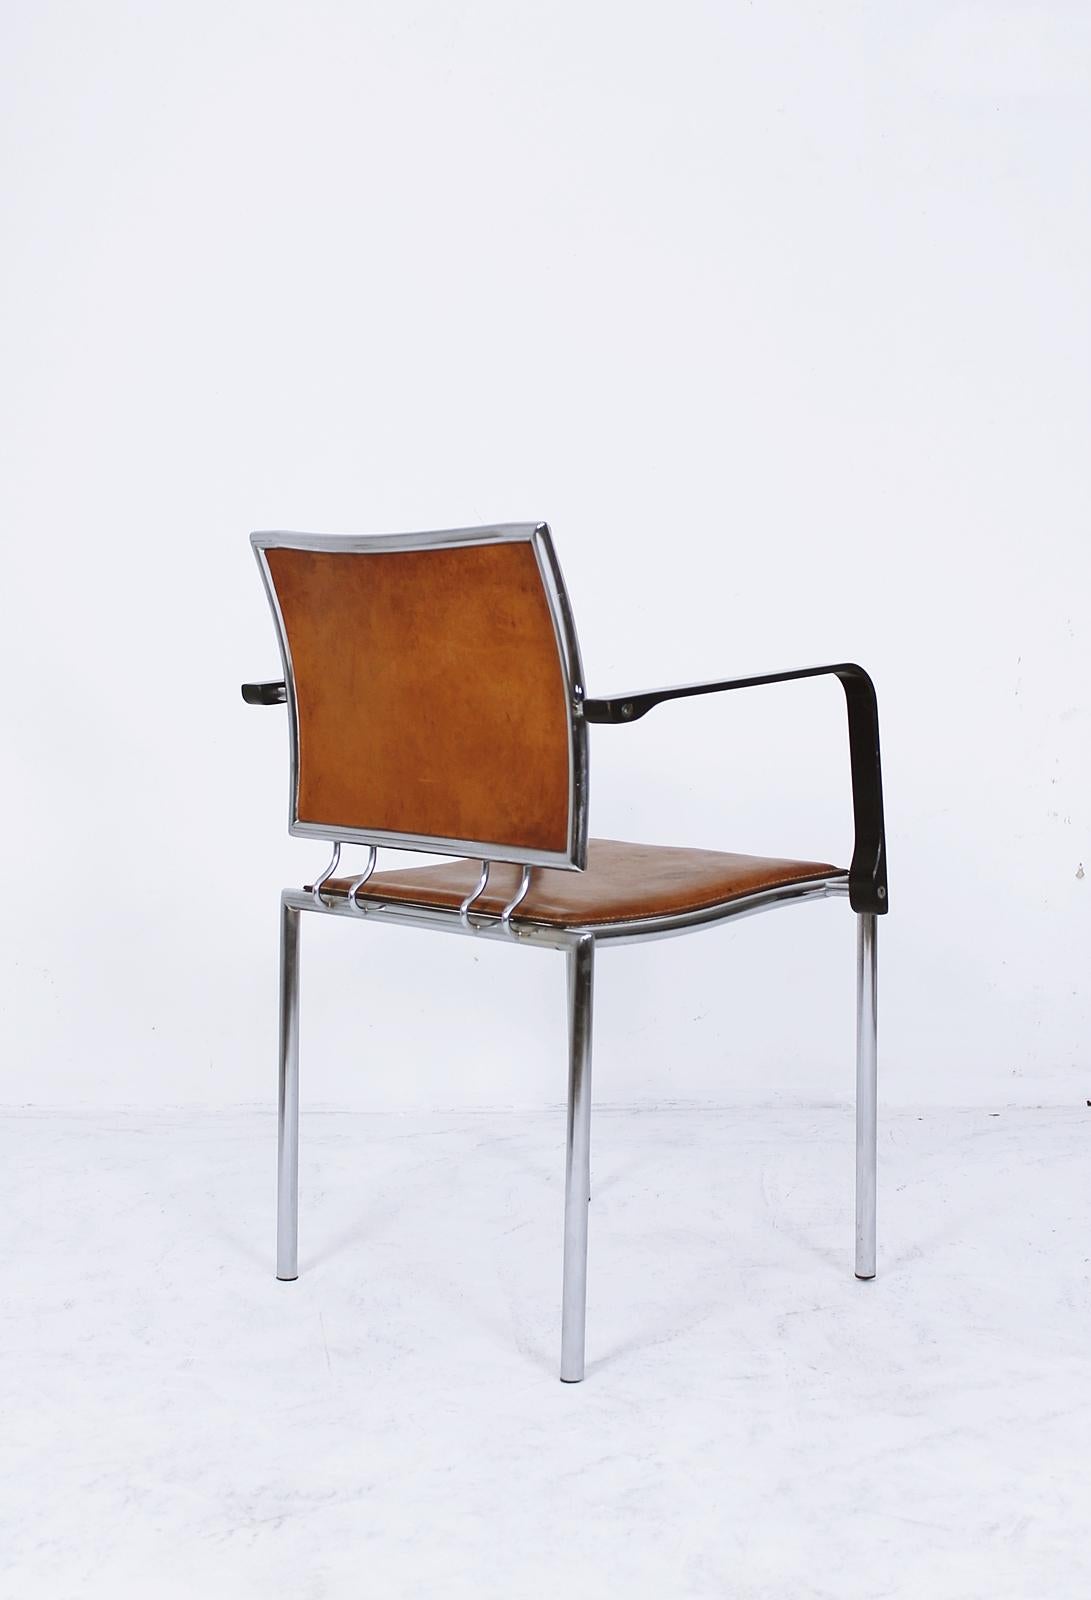 Swiss Armchair Quadro Steel by Bruno Rey & Charles Polin for Dietiker, 1990s For Sale 1